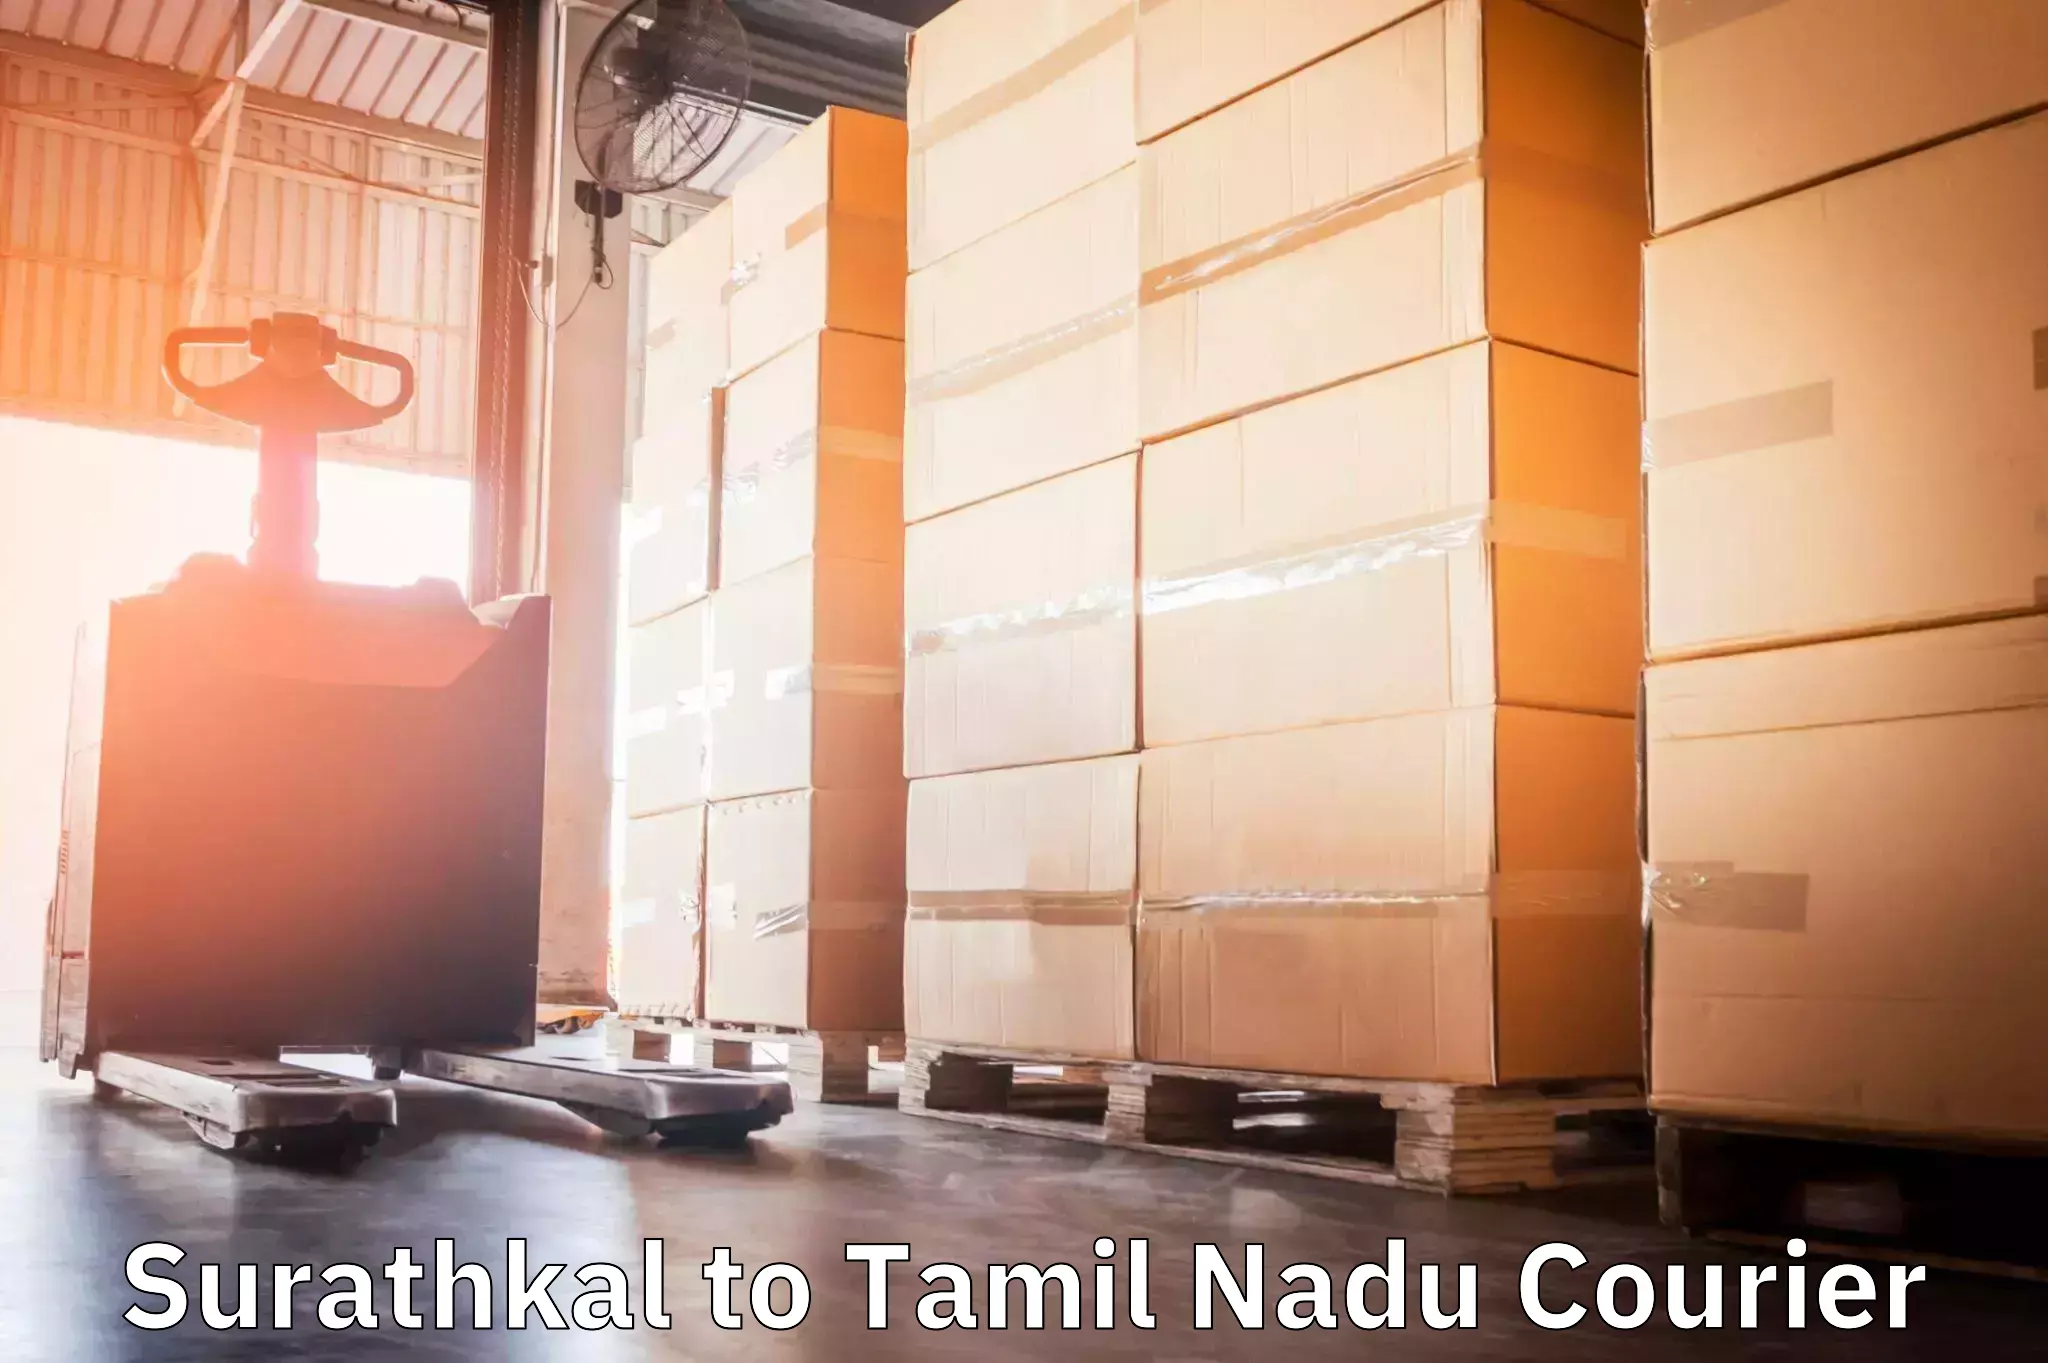 Global shipping networks Surathkal to Tamil Nadu